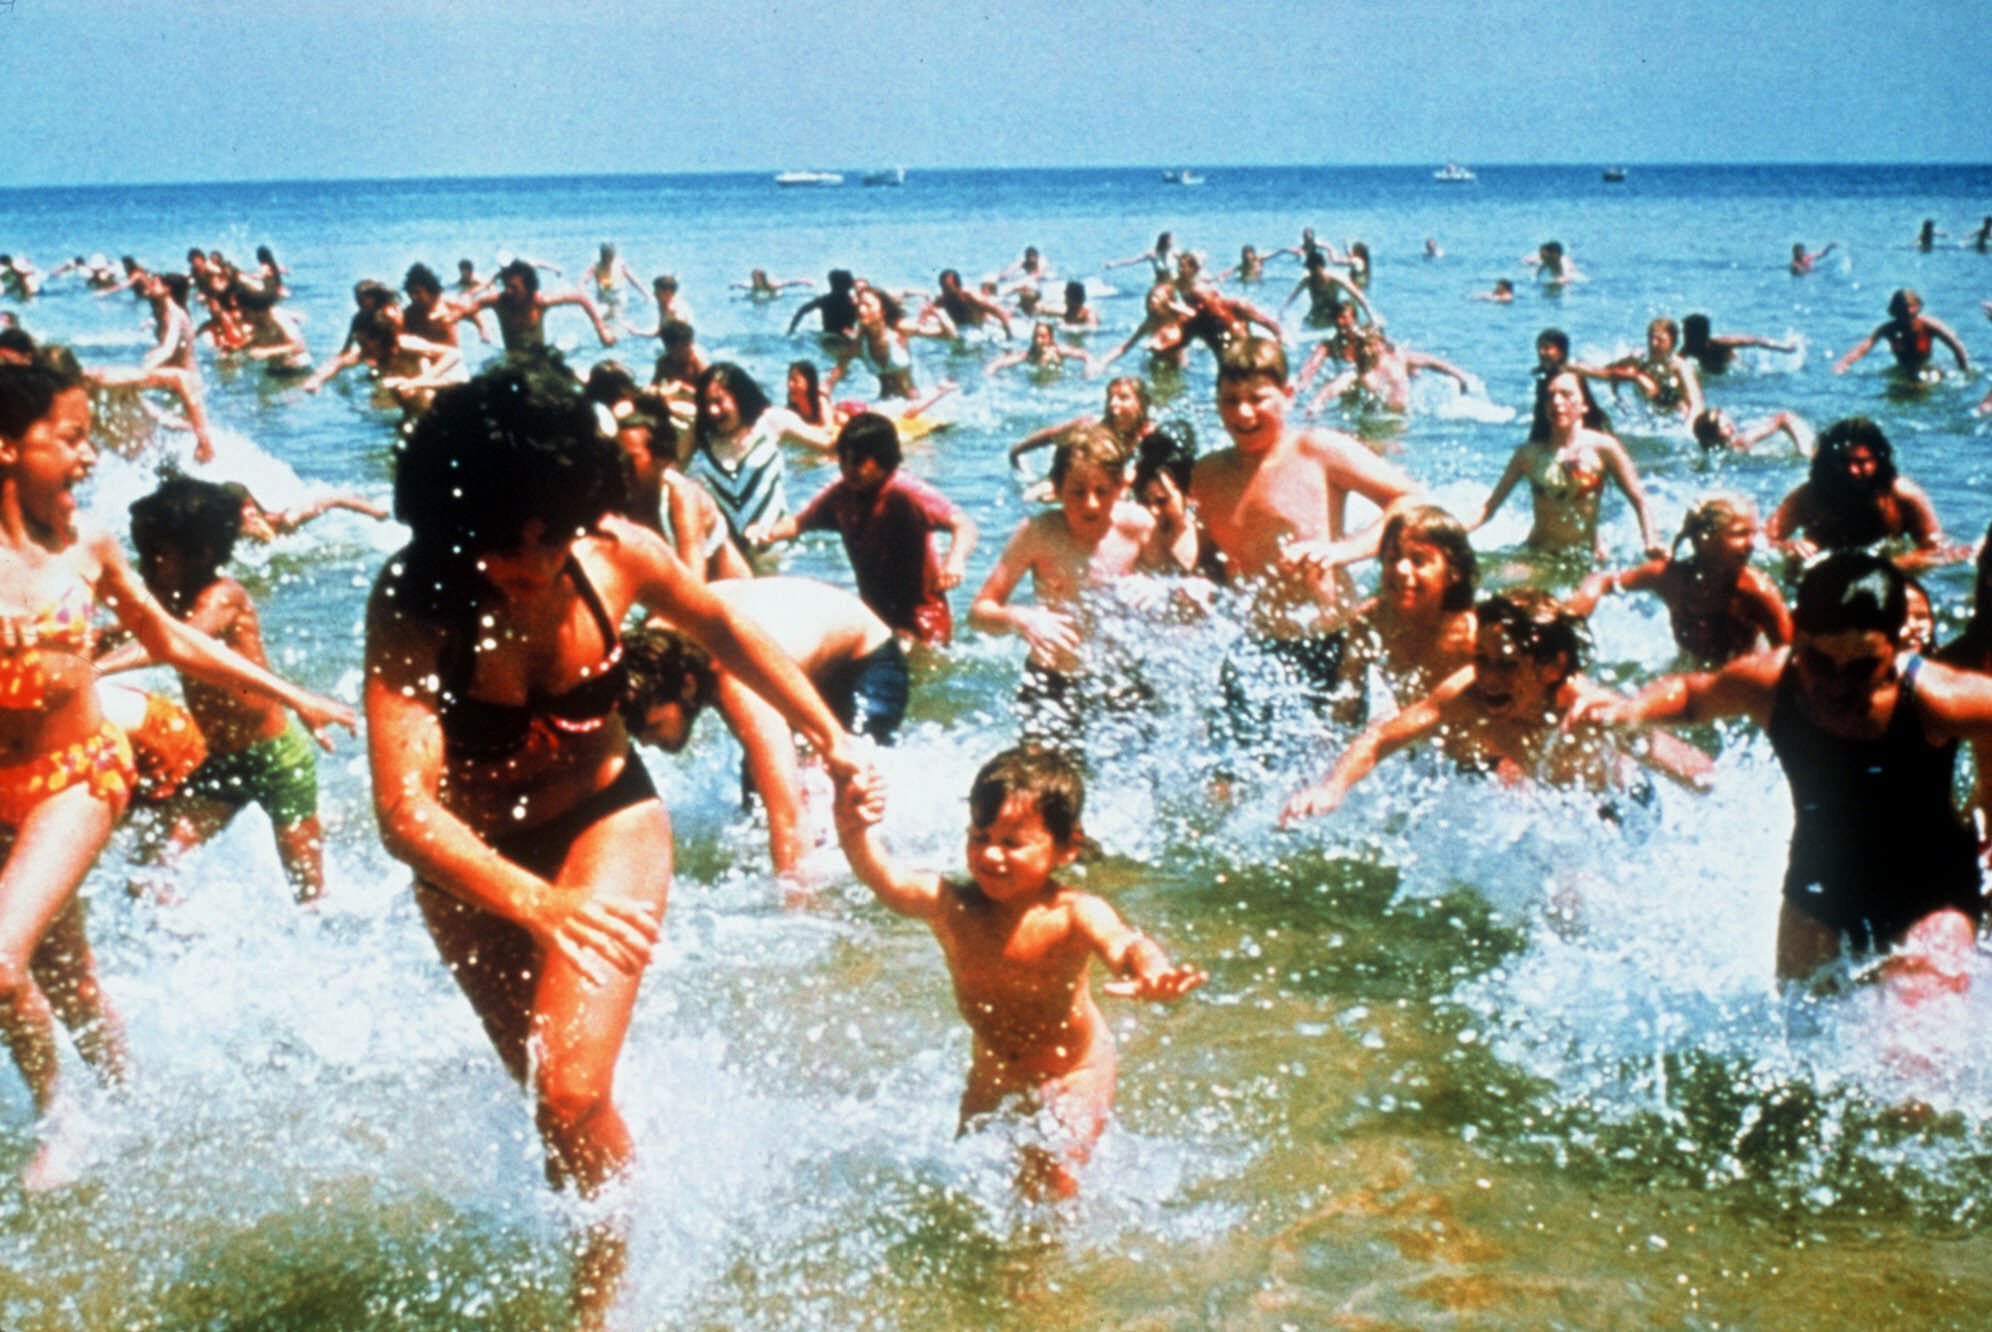 Four reasons why 'Jaws' became a classic